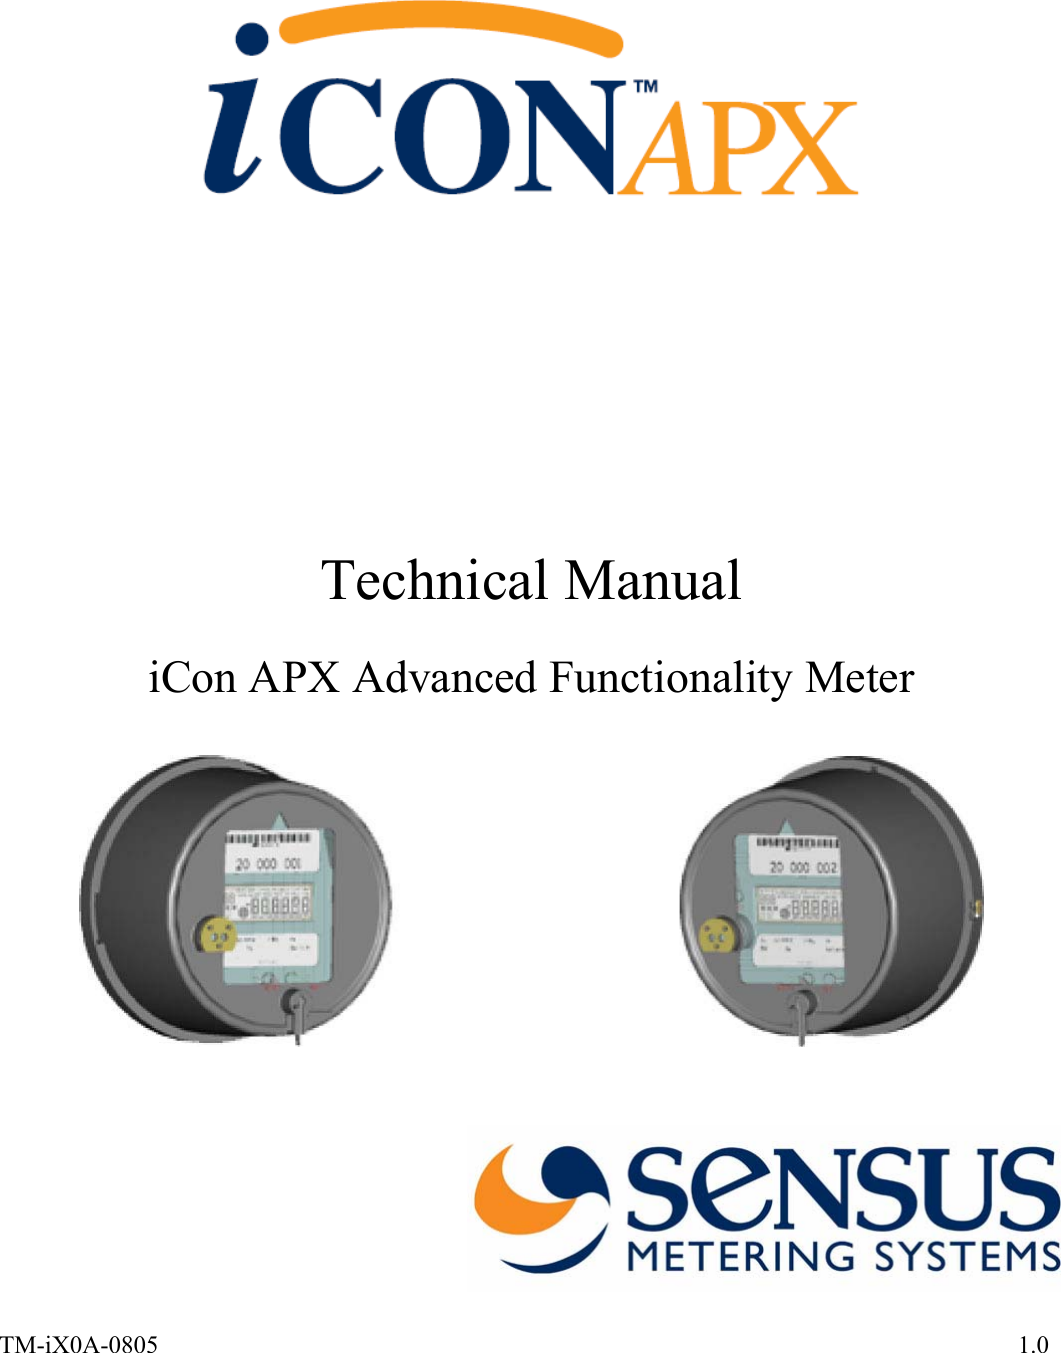     Technical Manual iCon APX Advanced Functionality Meter   TM-iX0A-0805  1.0 